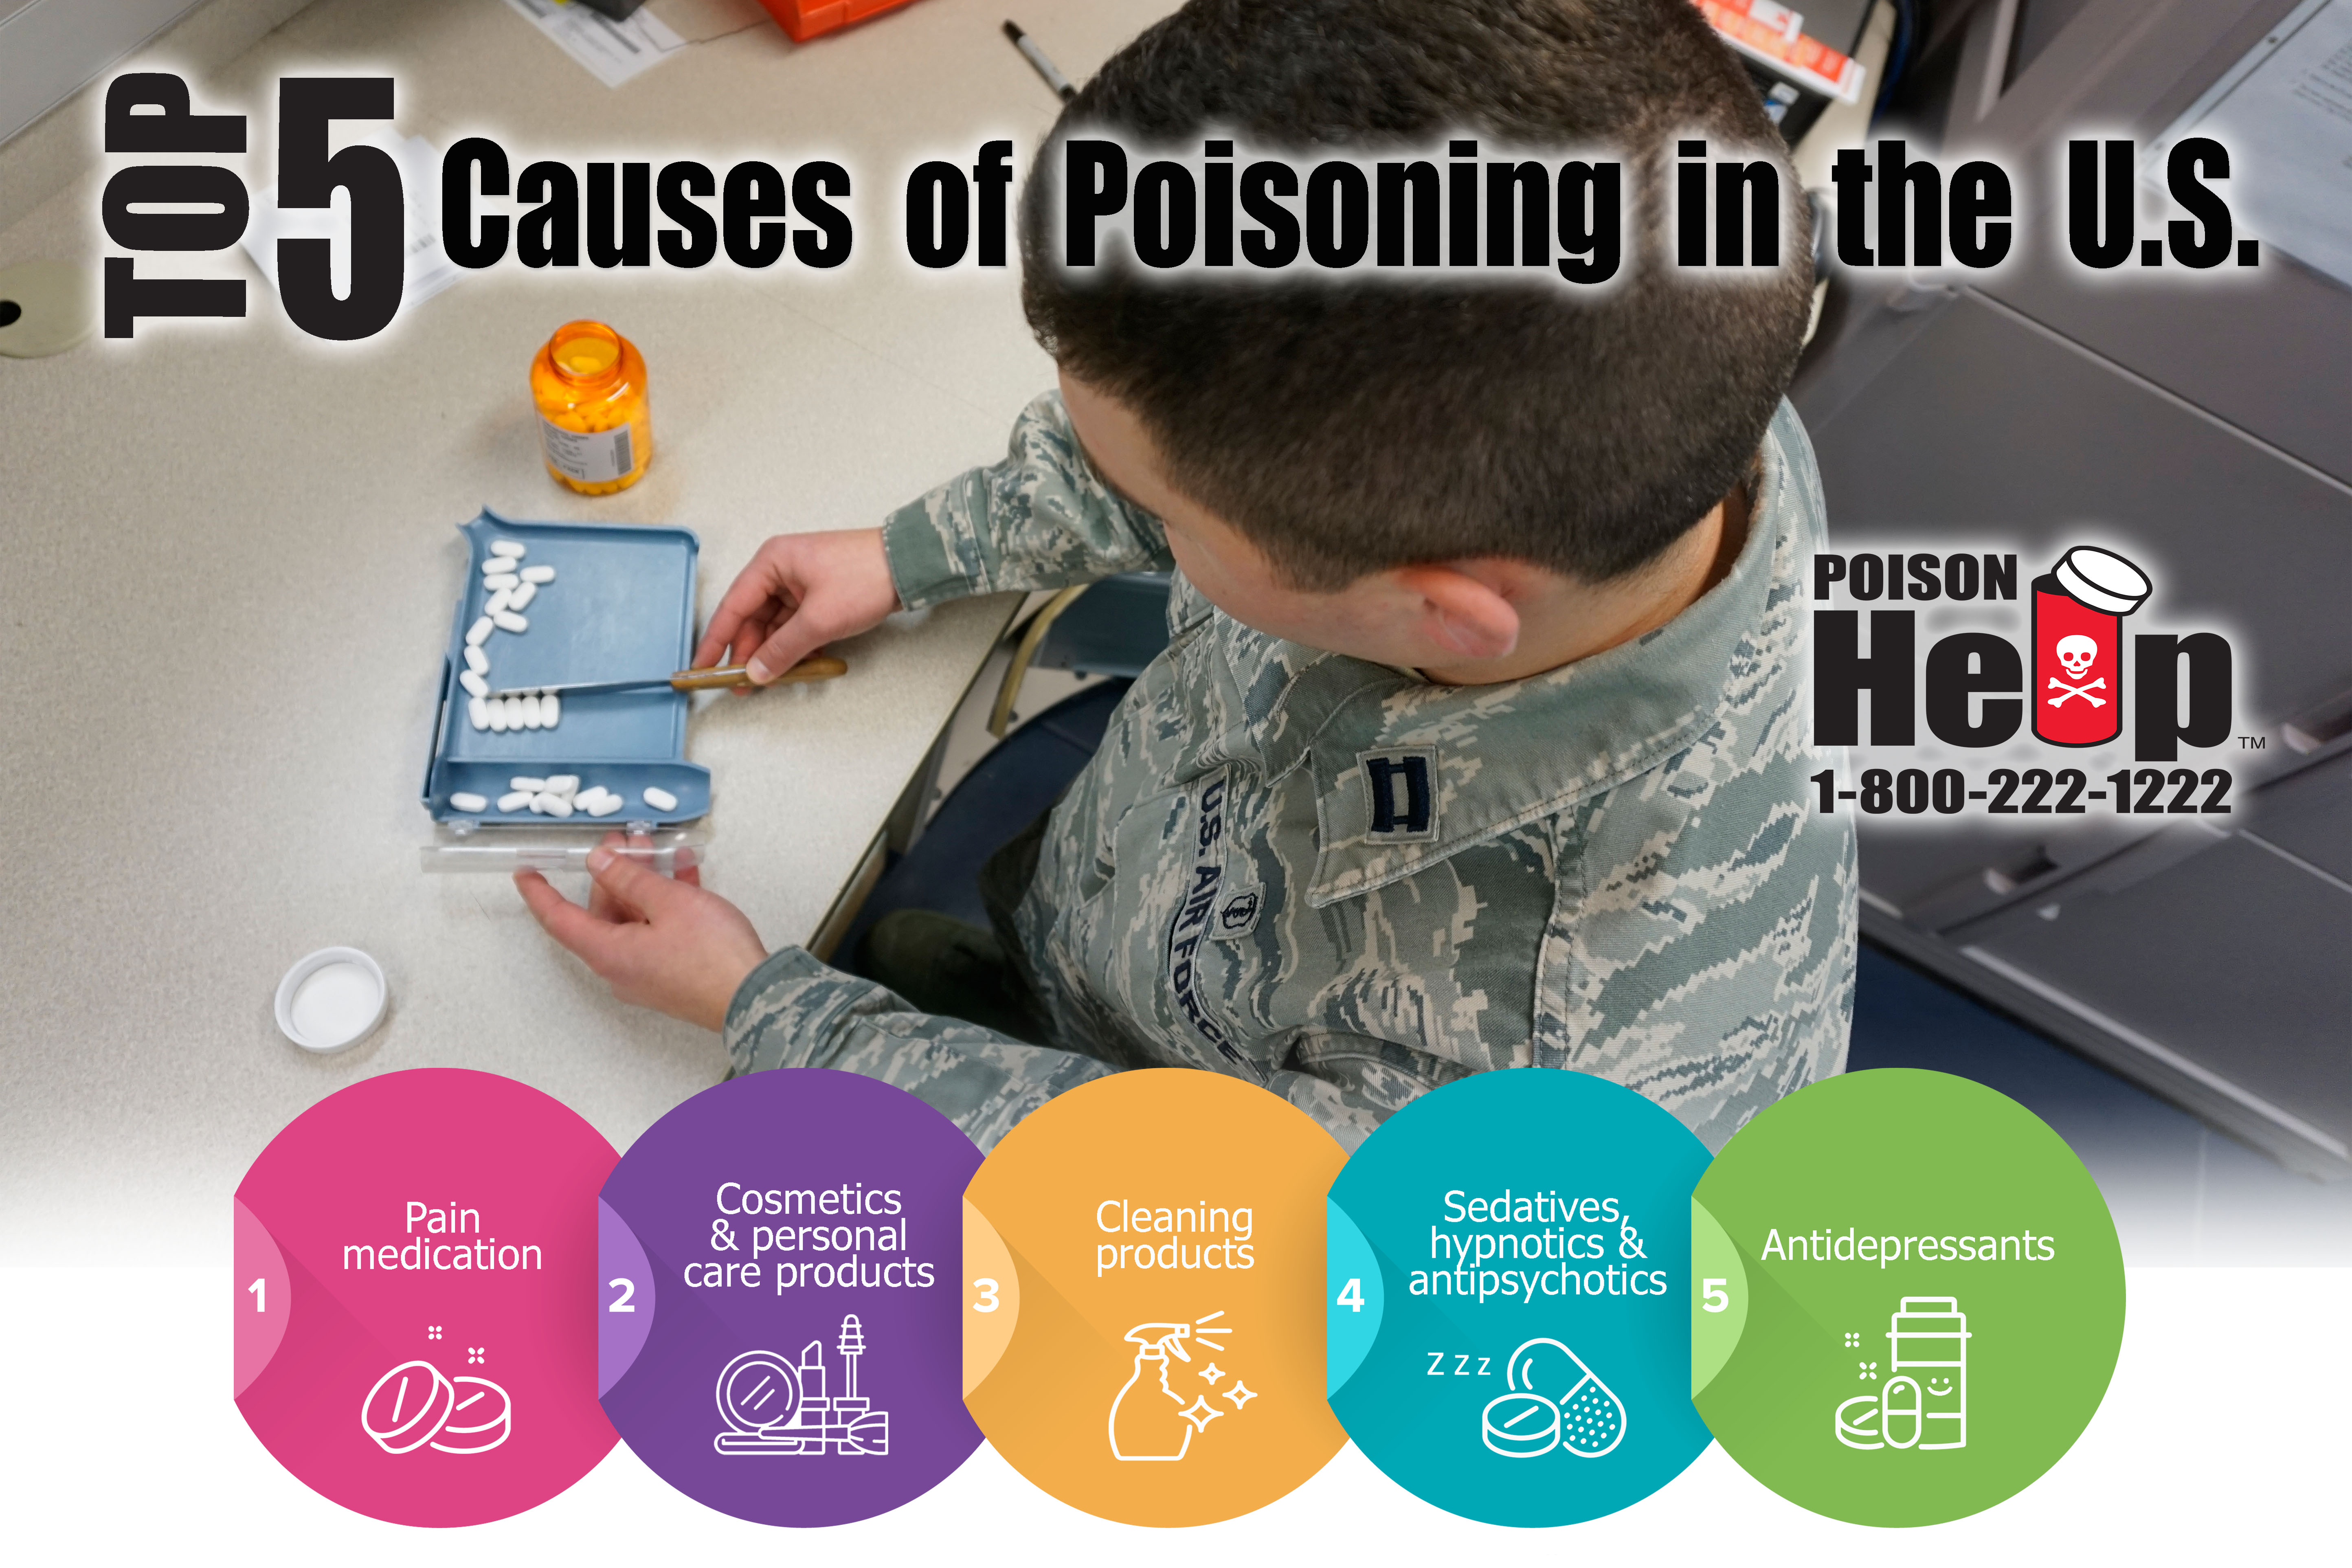 Top 5 causes of poisoning in the U.S.